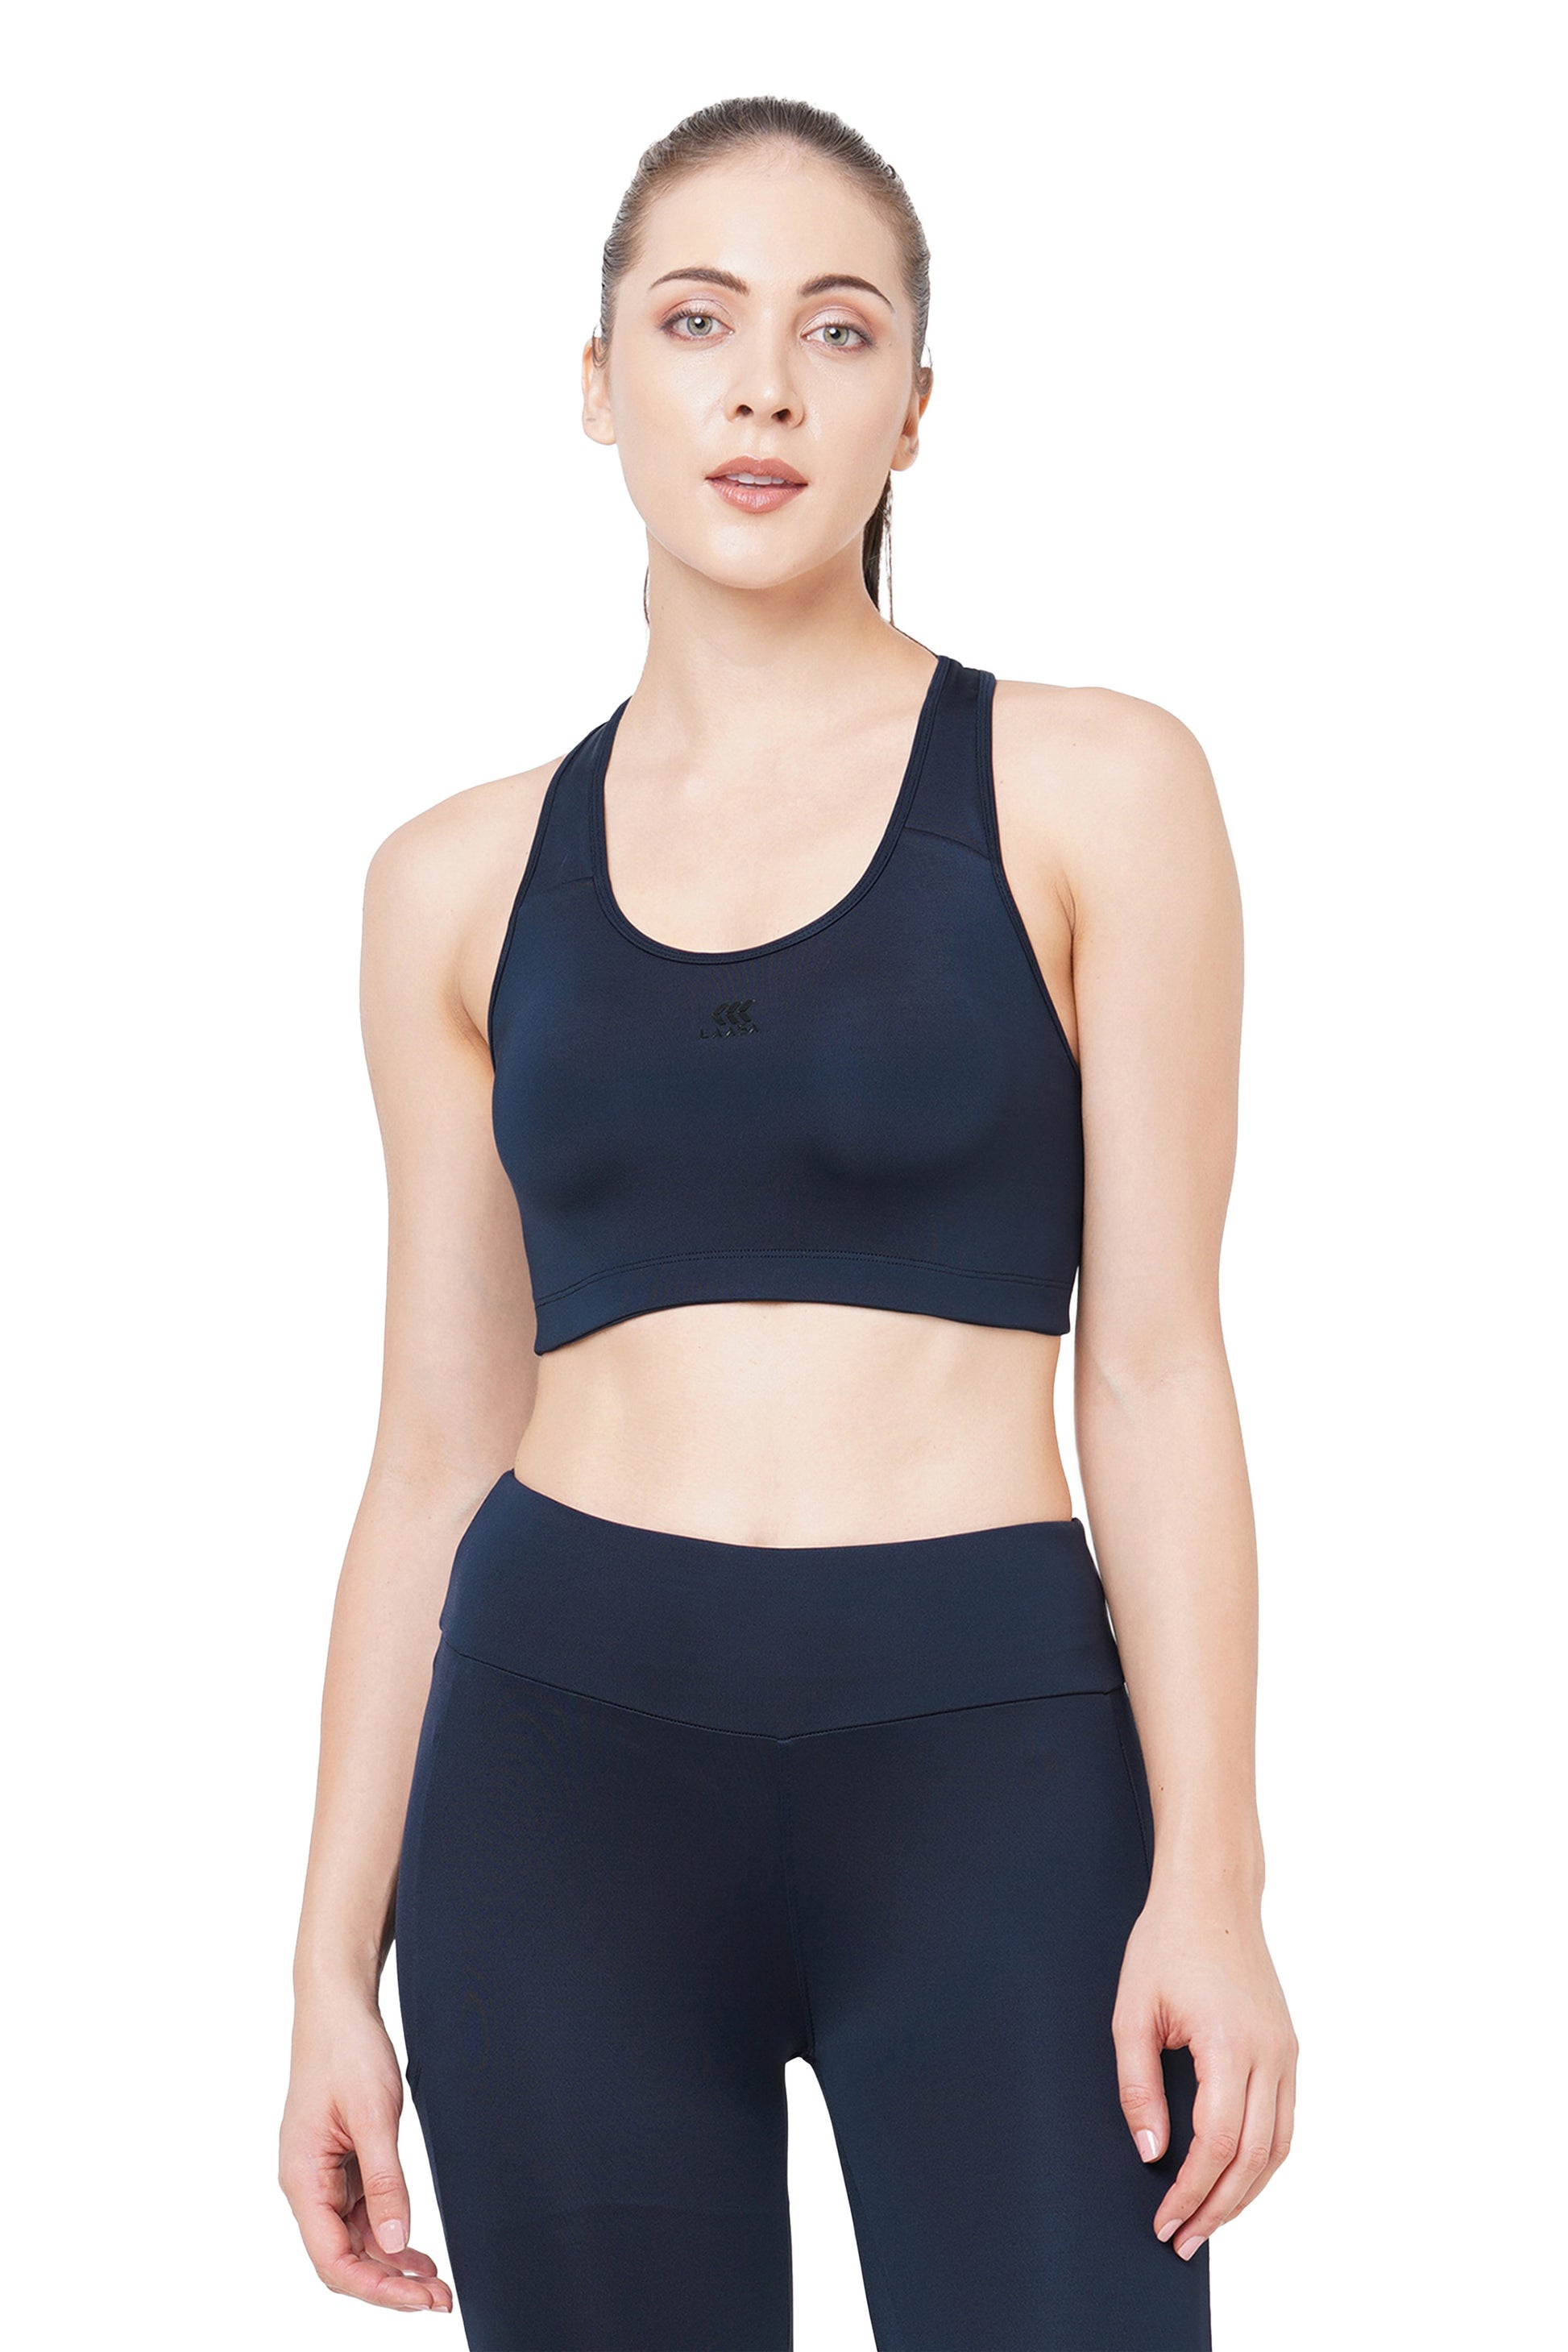 Women's Longline Sports Bra: Support Your Curves, Unleash Your Moves –  Laasa Sports